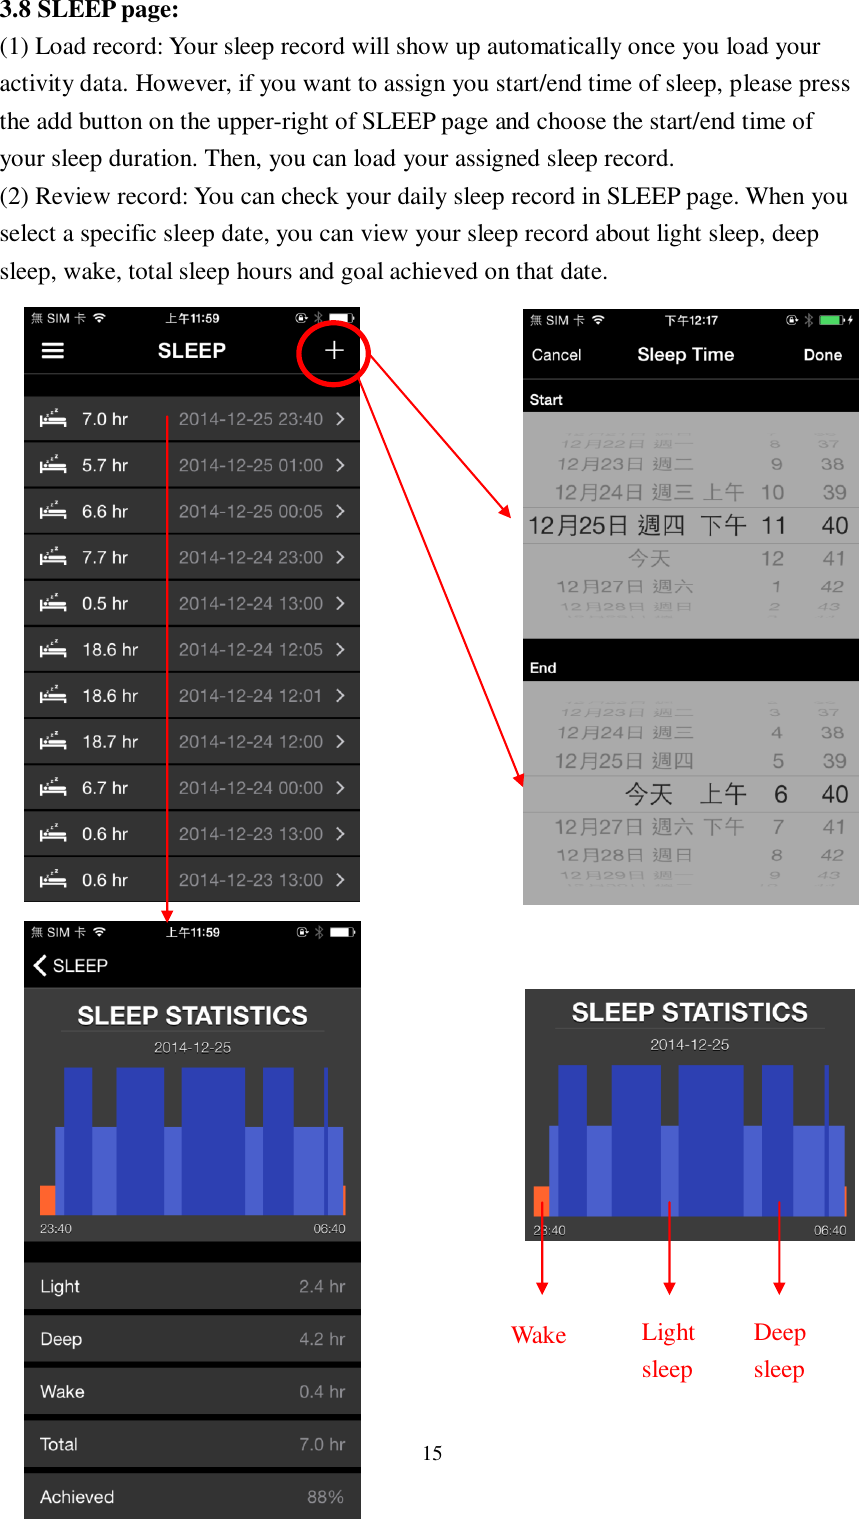 15  3.8 SLEEP page: (1) Load record: Your sleep record will show up automatically once you load your activity data. However, if you want to assign you start/end time of sleep, please press the add button on the upper-right of SLEEP page and choose the start/end time of your sleep duration. Then, you can load your assigned sleep record. (2) Review record: You can check your daily sleep record in SLEEP page. When you select a specific sleep date, you can view your sleep record about light sleep, deep sleep, wake, total sleep hours and goal achieved on that date.                               Wake  Light sleep Deep sleep 